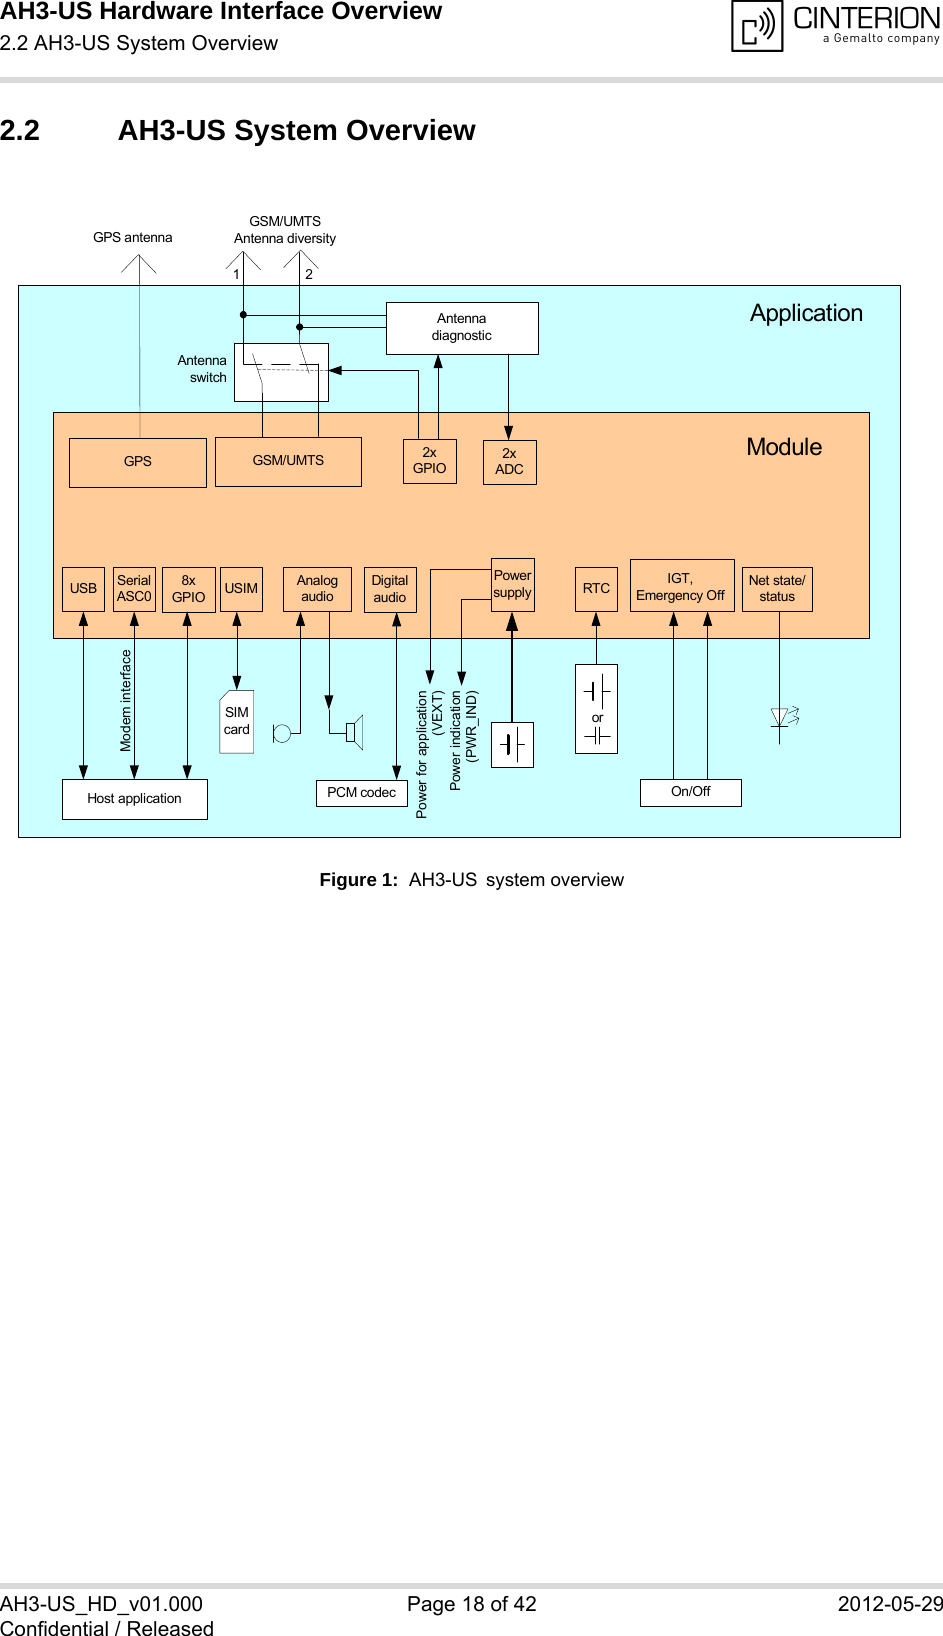 AH3-US Hardware Interface Overview2.2 AH3-US System Overview18AH3-US_HD_v01.000 Page 18 of 42 2012-05-29Confidential / Released2.2 AH3-US System OverviewFigure 1:  AH3-US system overviewUSB SerialASC0 USIM AnalogaudioPowersupply RTC IGT,Emergency OffNet state/statusSIMcardHost application On/OffModuleApplicationorGSM/UMTS Antenna diversityPower for application (VEXT)Power indication(PWR_IND)Modem interfaceDigitalaudioPCM codecGSM/UMTS12GPSGPS antenna8xGPIO2xGPIOAntenna diagnostic2xADCAntenna switch